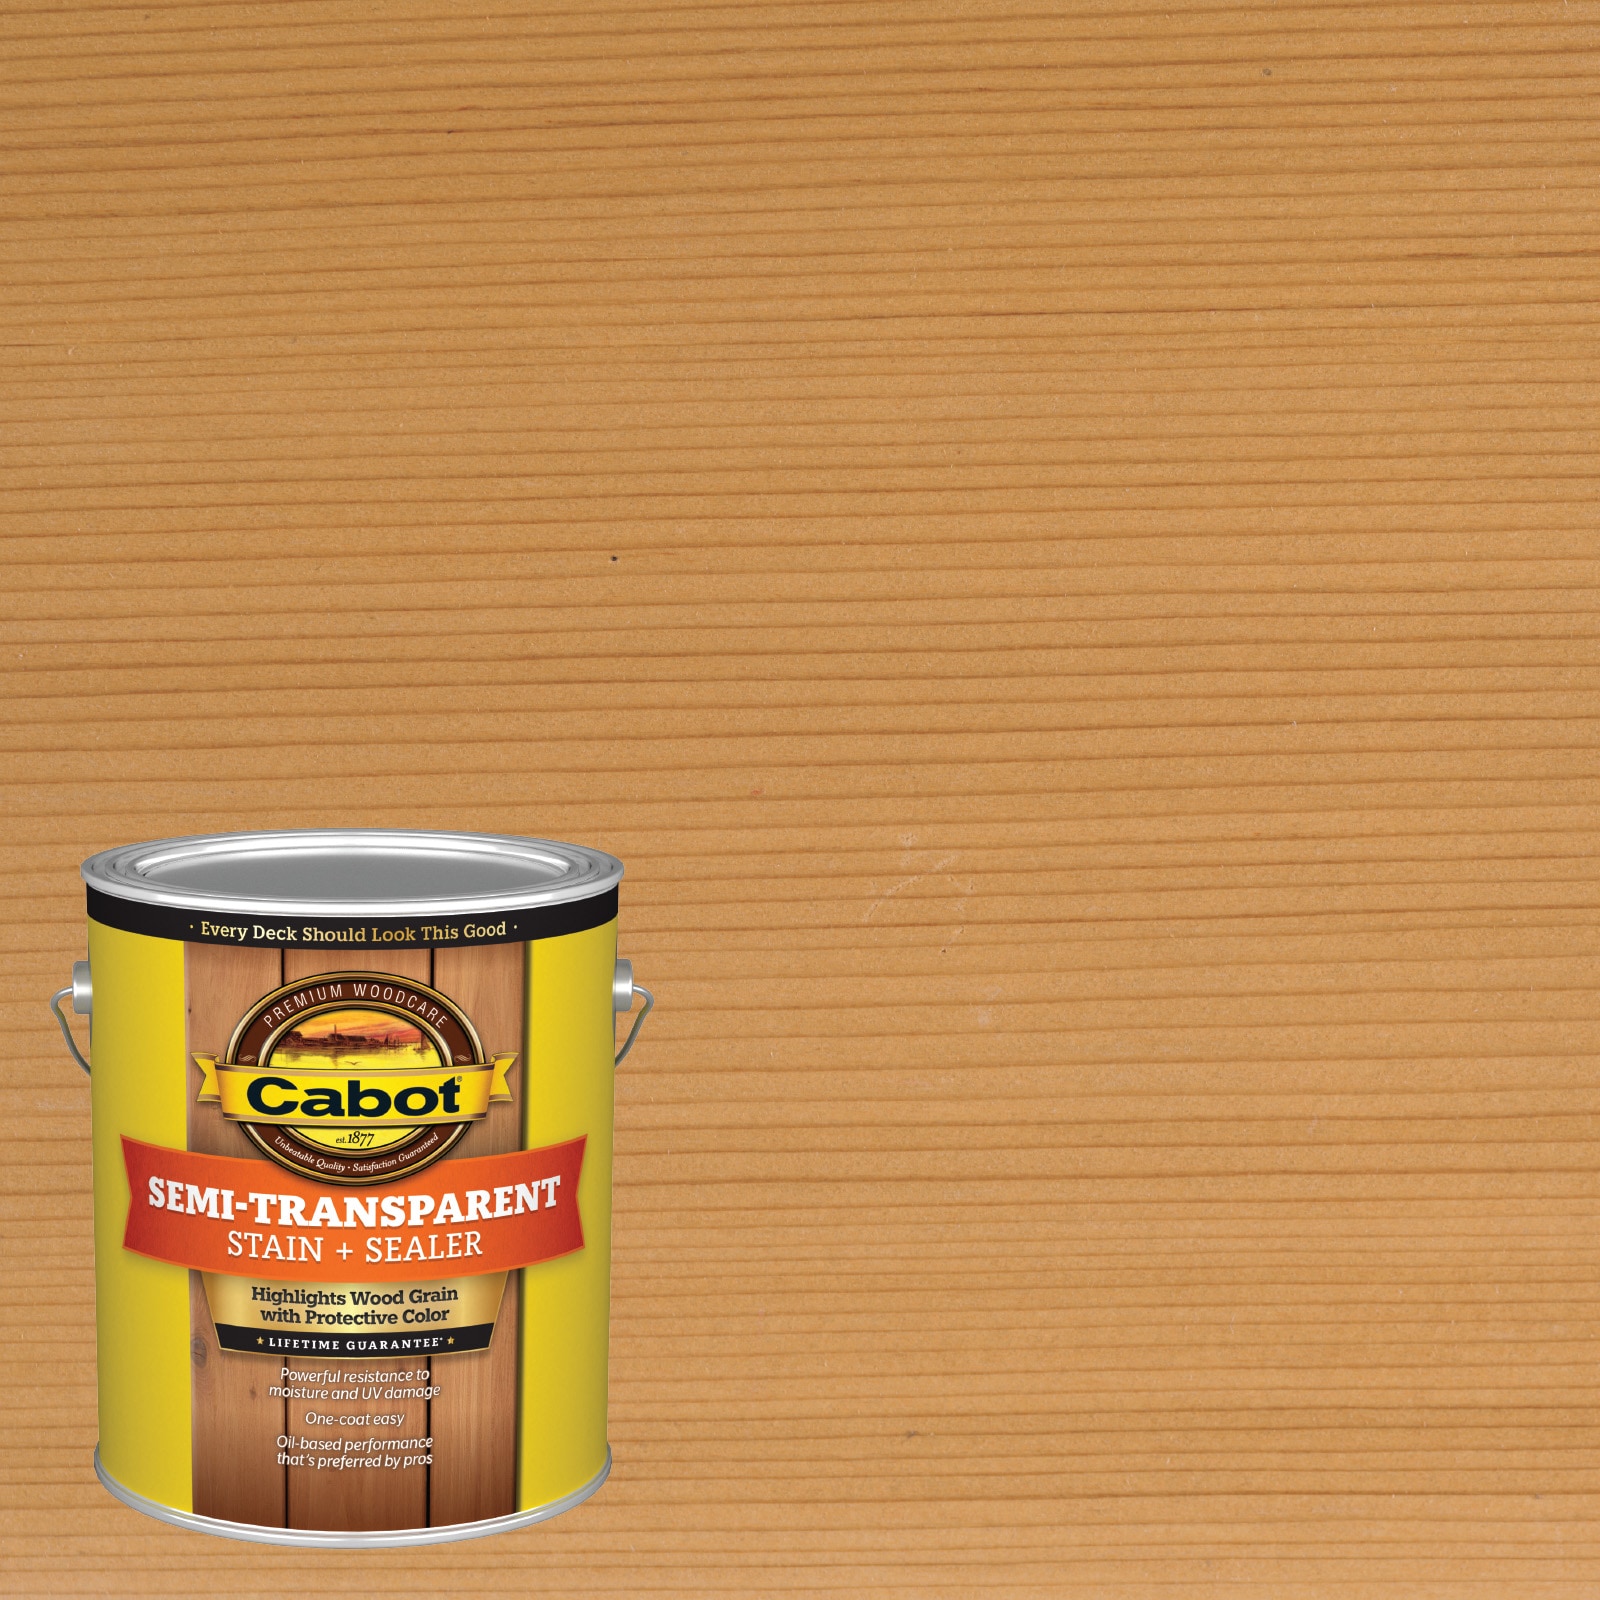 New Cedar Semi-transparent Exterior Wood Stain and Sealer (1-Gallon) in Brown | - Cabot NEW CEDAR-238716